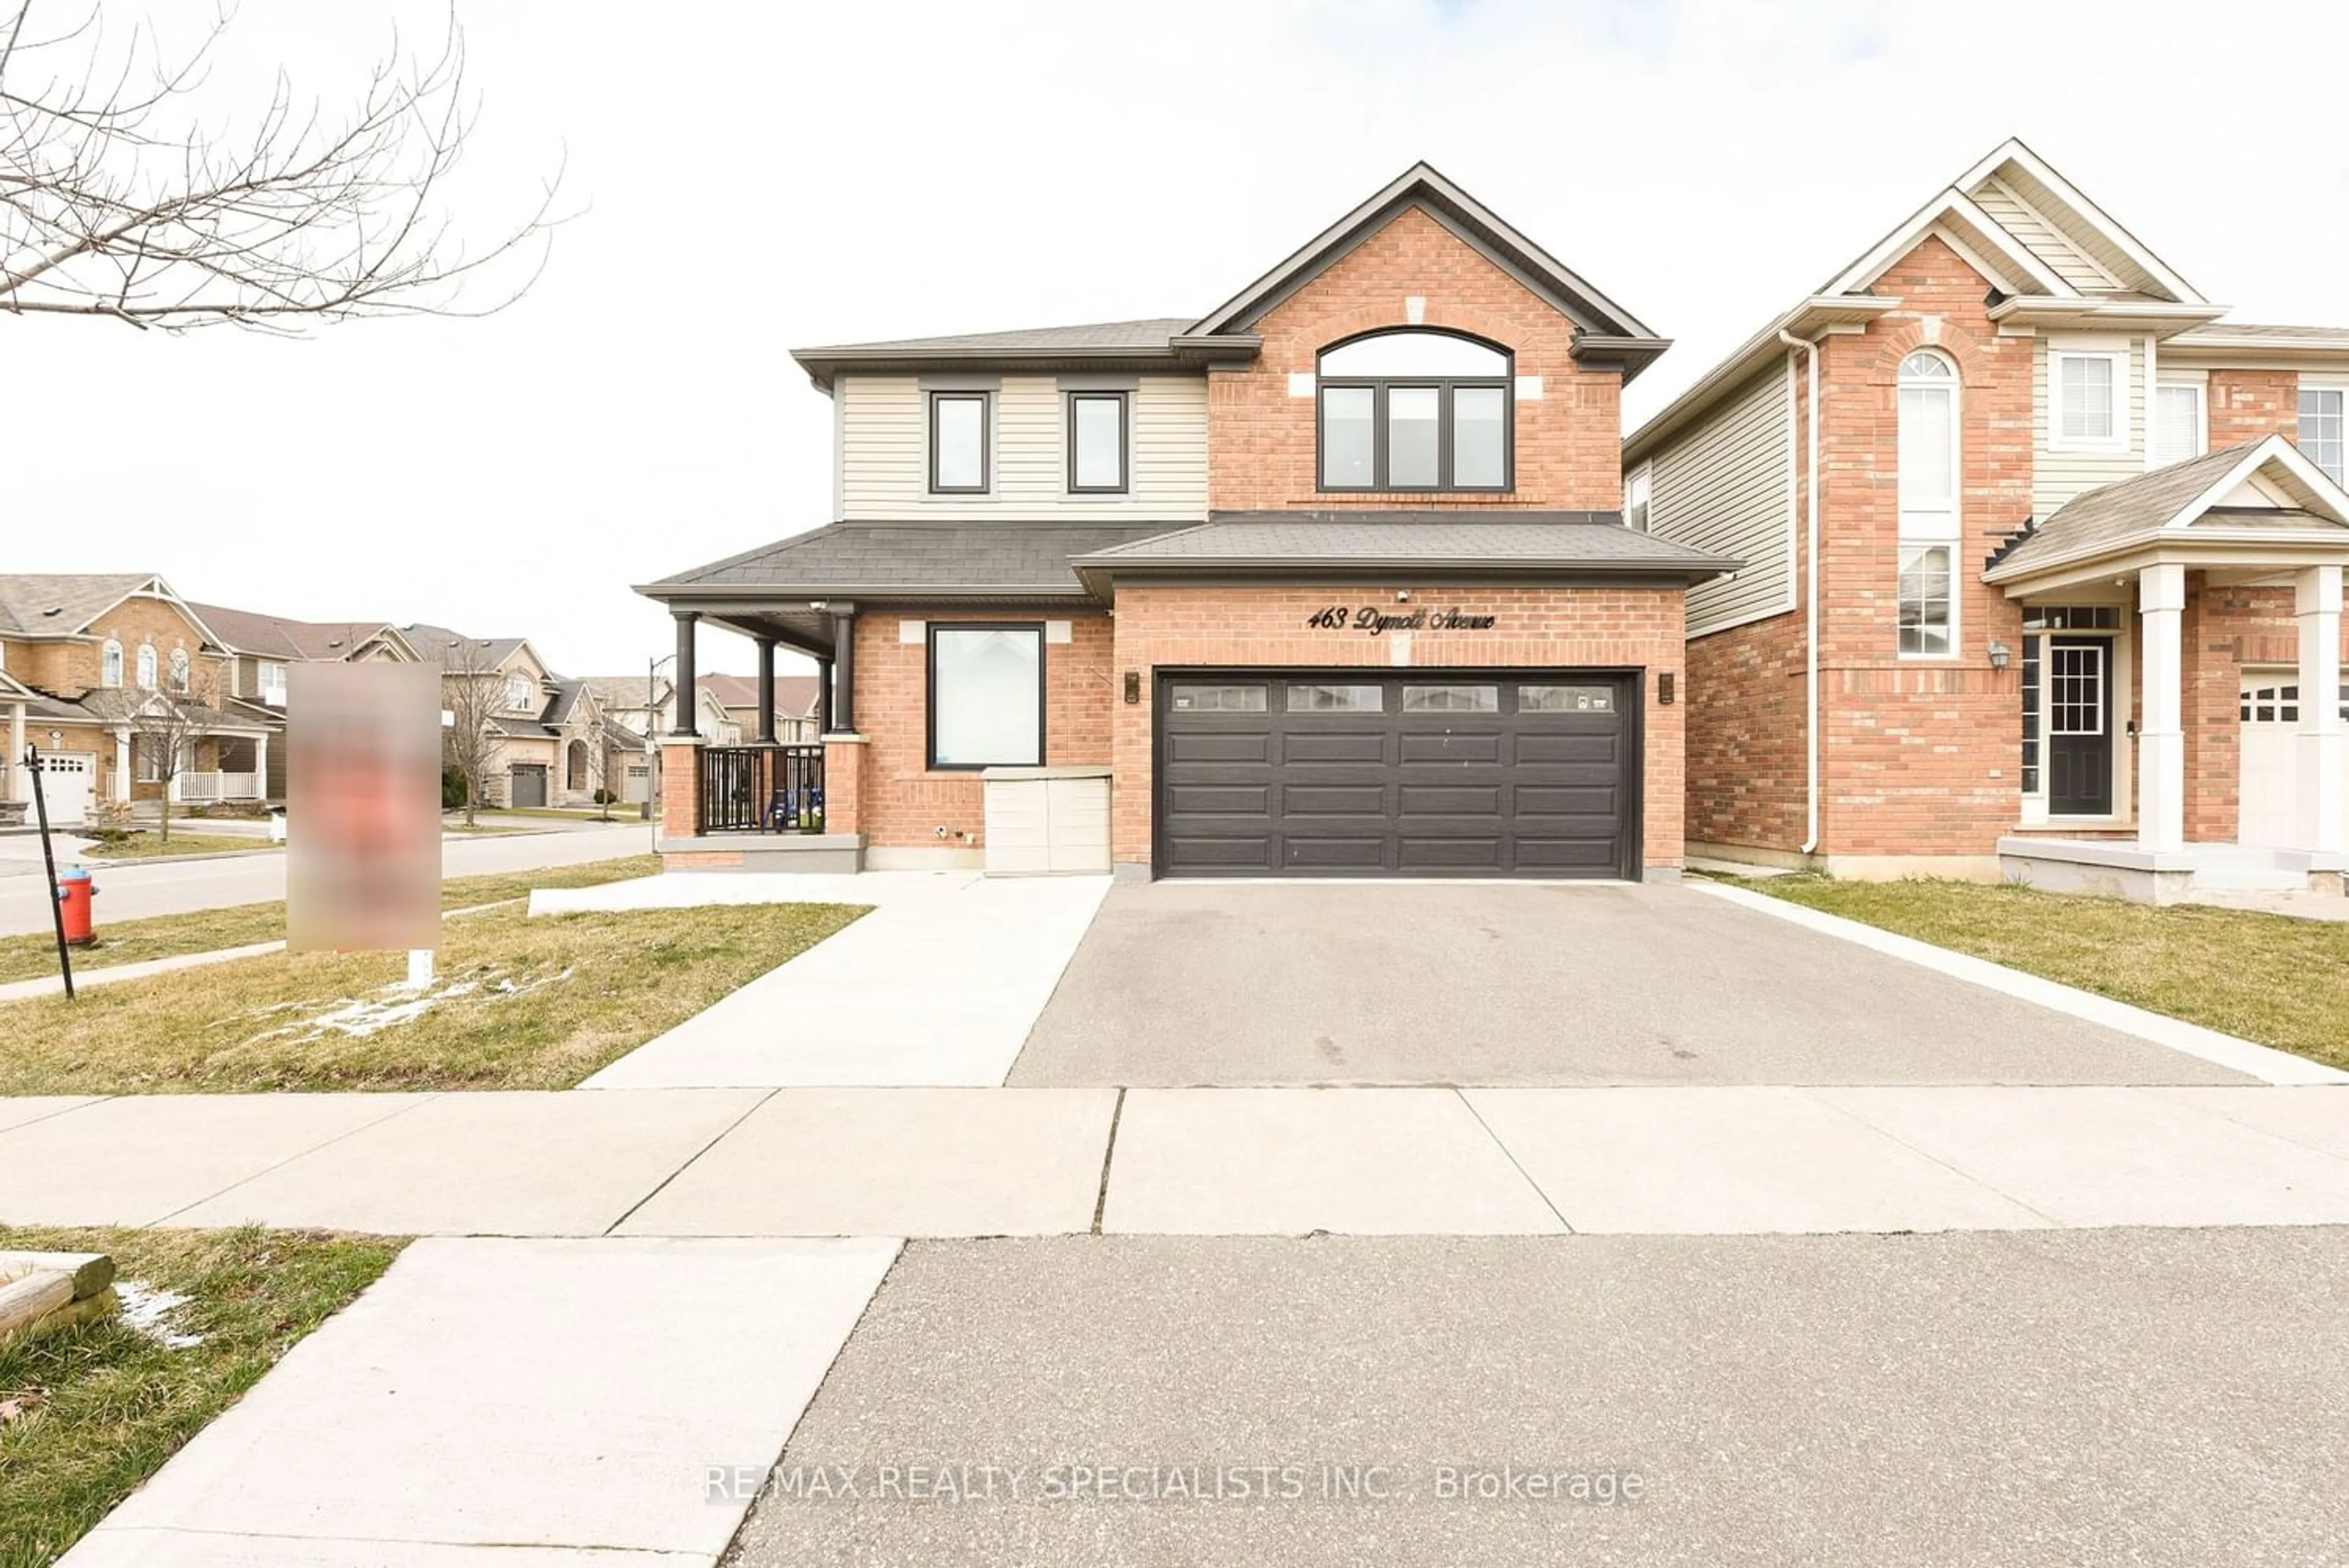 Home with brick exterior material for 463 Dymott Ave, Milton Ontario L9T 7V3